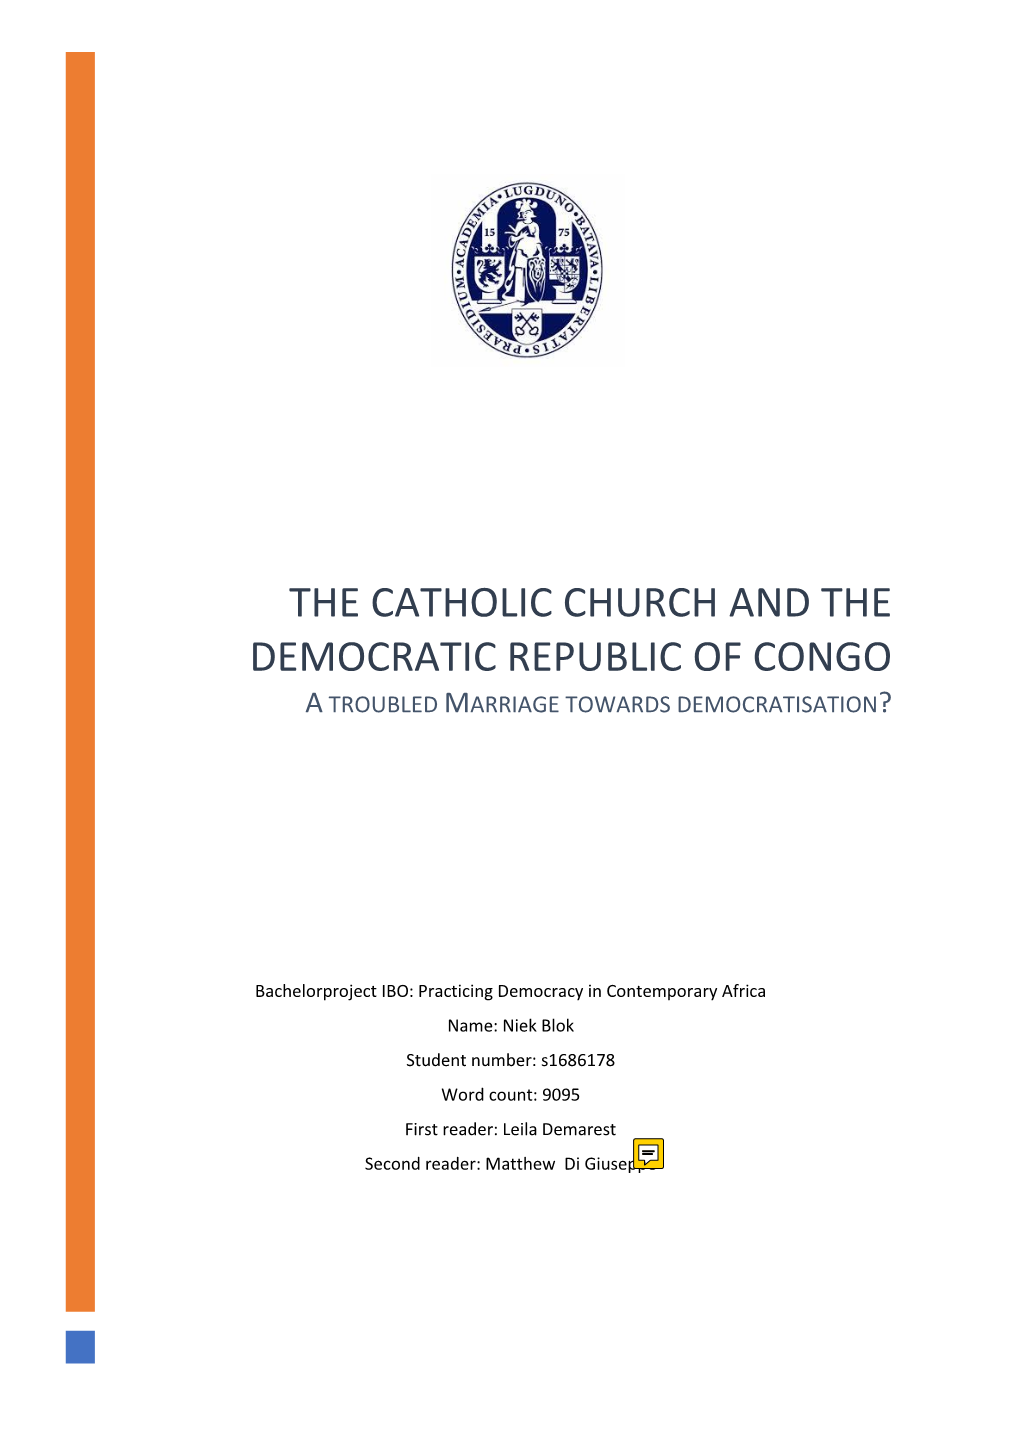 The Catholic Church and the Democratic Republic of Congo a Troubled Marriage Towards Democratisation?